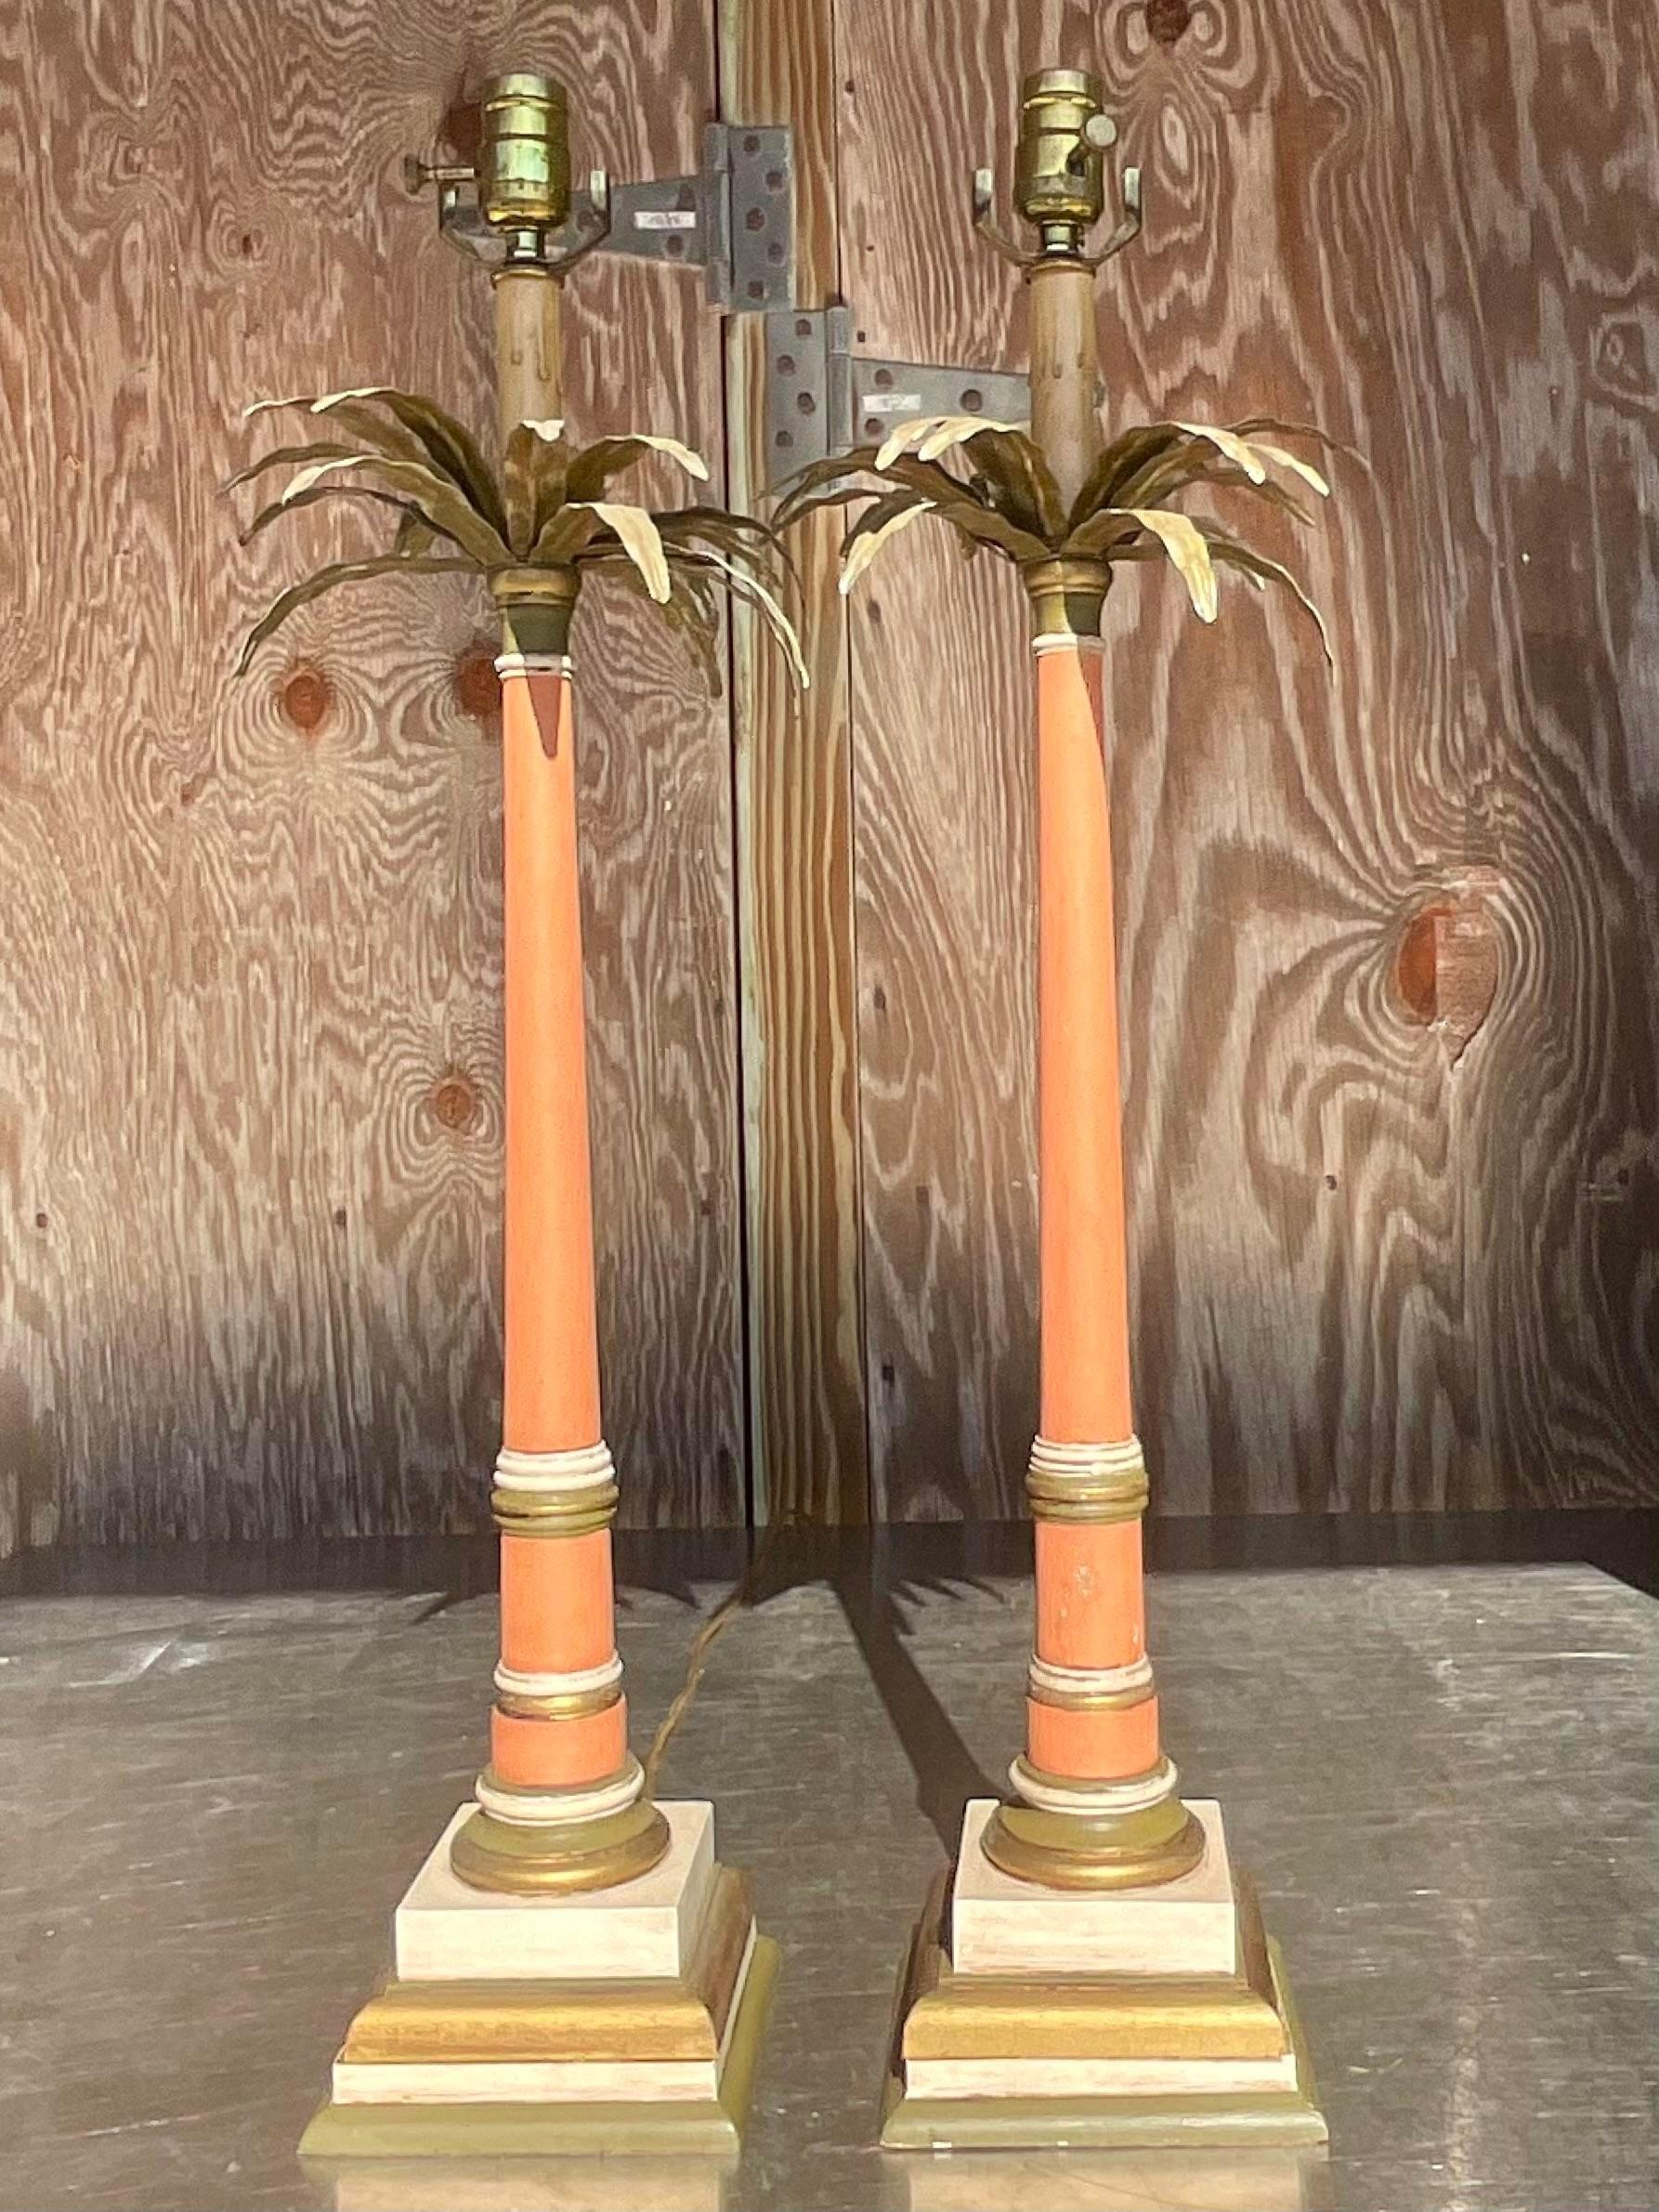 20th Century Vintage Regency Palm Tree Candlestick Lamps - a Pair